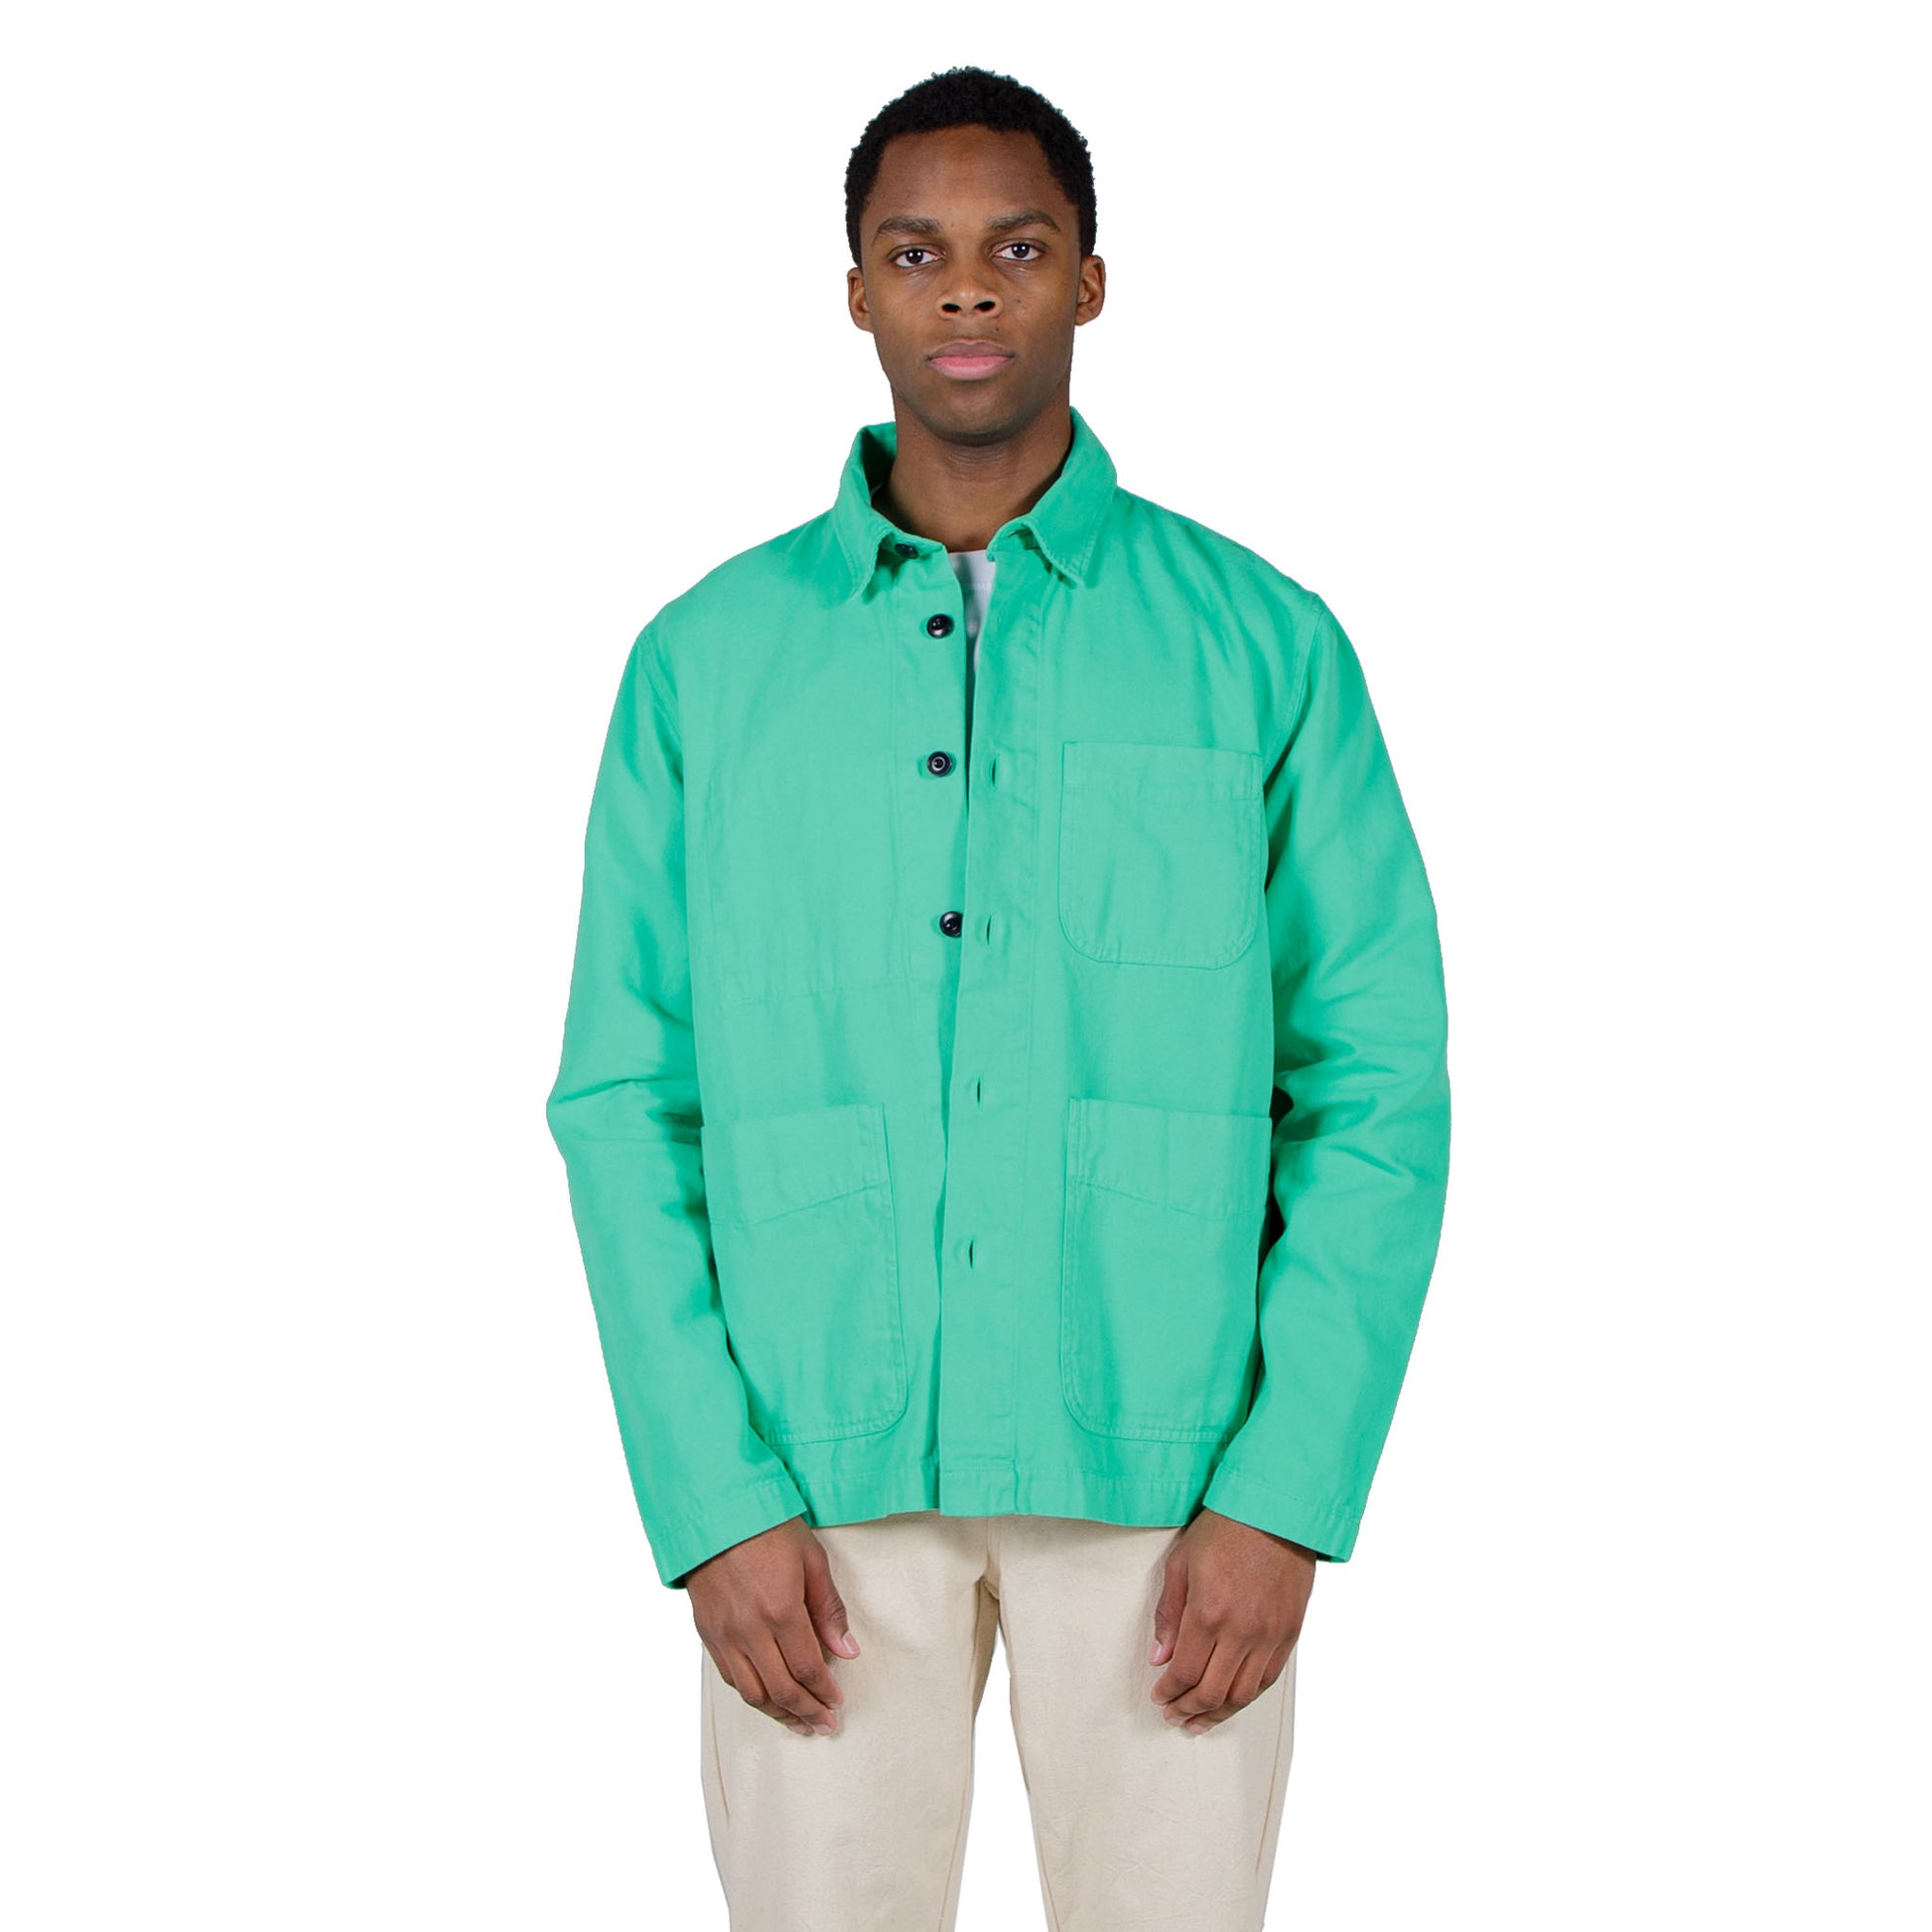 Albam Foundry Shirt in Bright Green